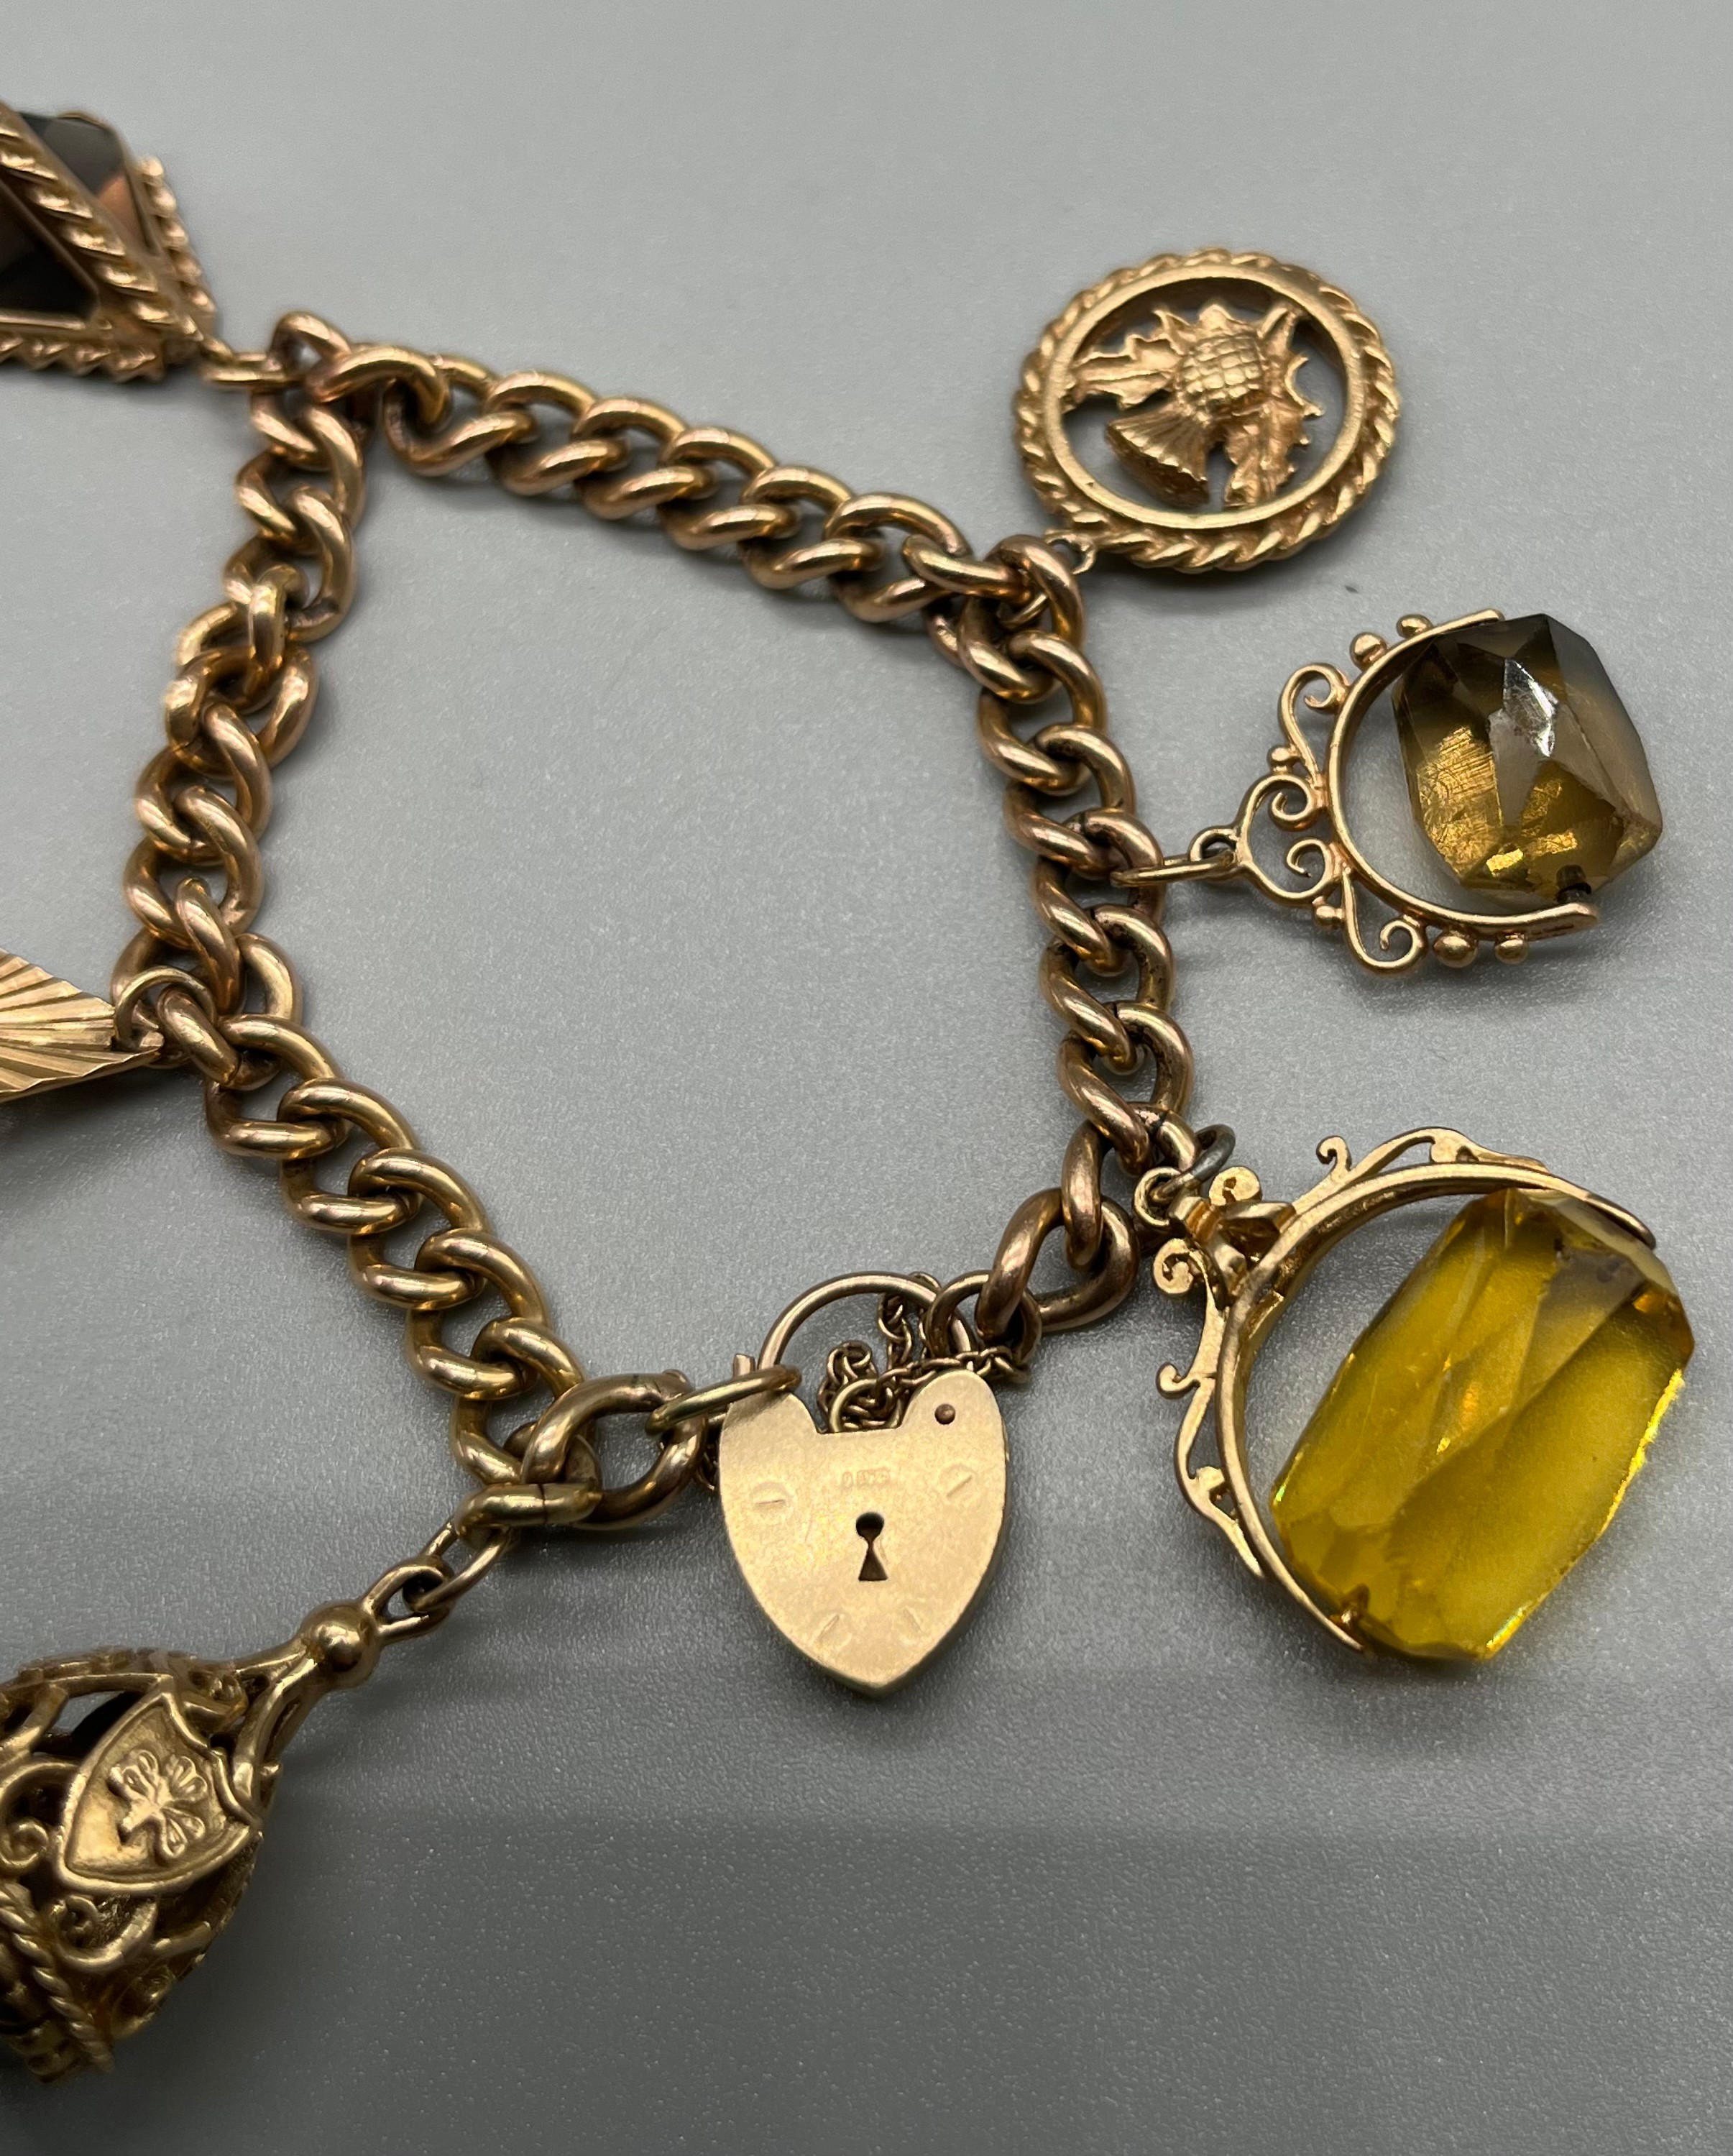 A 9ct gold charm bracelet, attached with various fob charms. [43.04grams] - Image 4 of 5